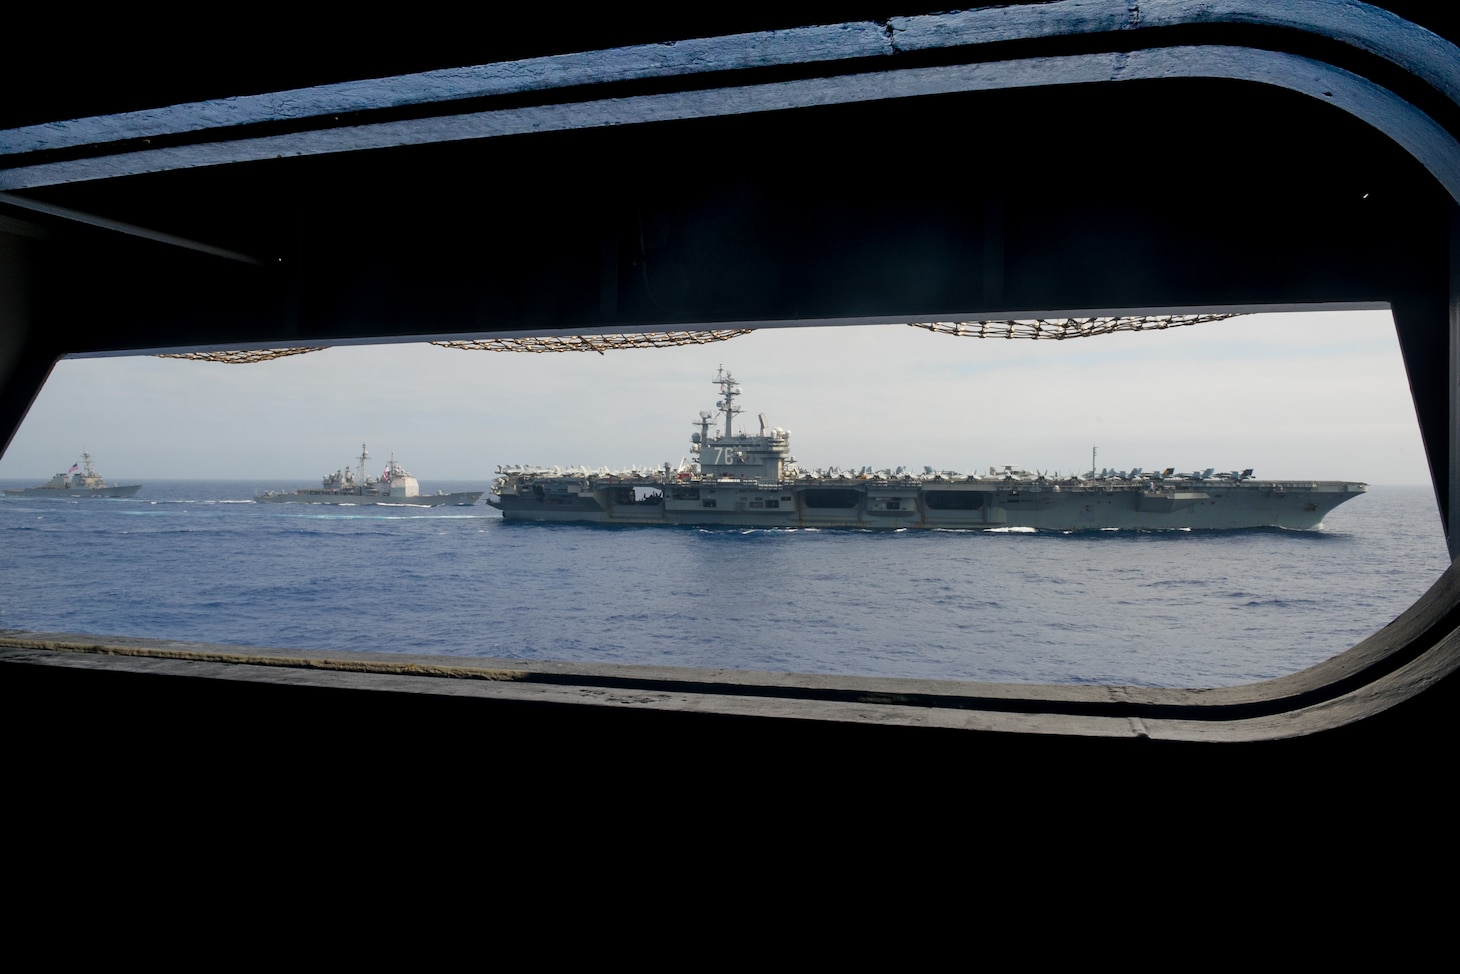 PHILIPPINE SEA (June 18, 2016) - The Nimitz-class aircraft carriers USS John C. Stennis (CVN 74) and USS Ronald Reagan (CVN 76) conduct dual carrier strike group operations in the U.S. 7th Fleet area of operations in support of security and stability in the Indo-Asia-Pacific. The operations mark the U.S. Navy's continued presence throughout the area of responsibility. (U.S. Navy photo by Mass Communication Specialist 3rd Class Kenneth Rodriguez Santiago / Released)